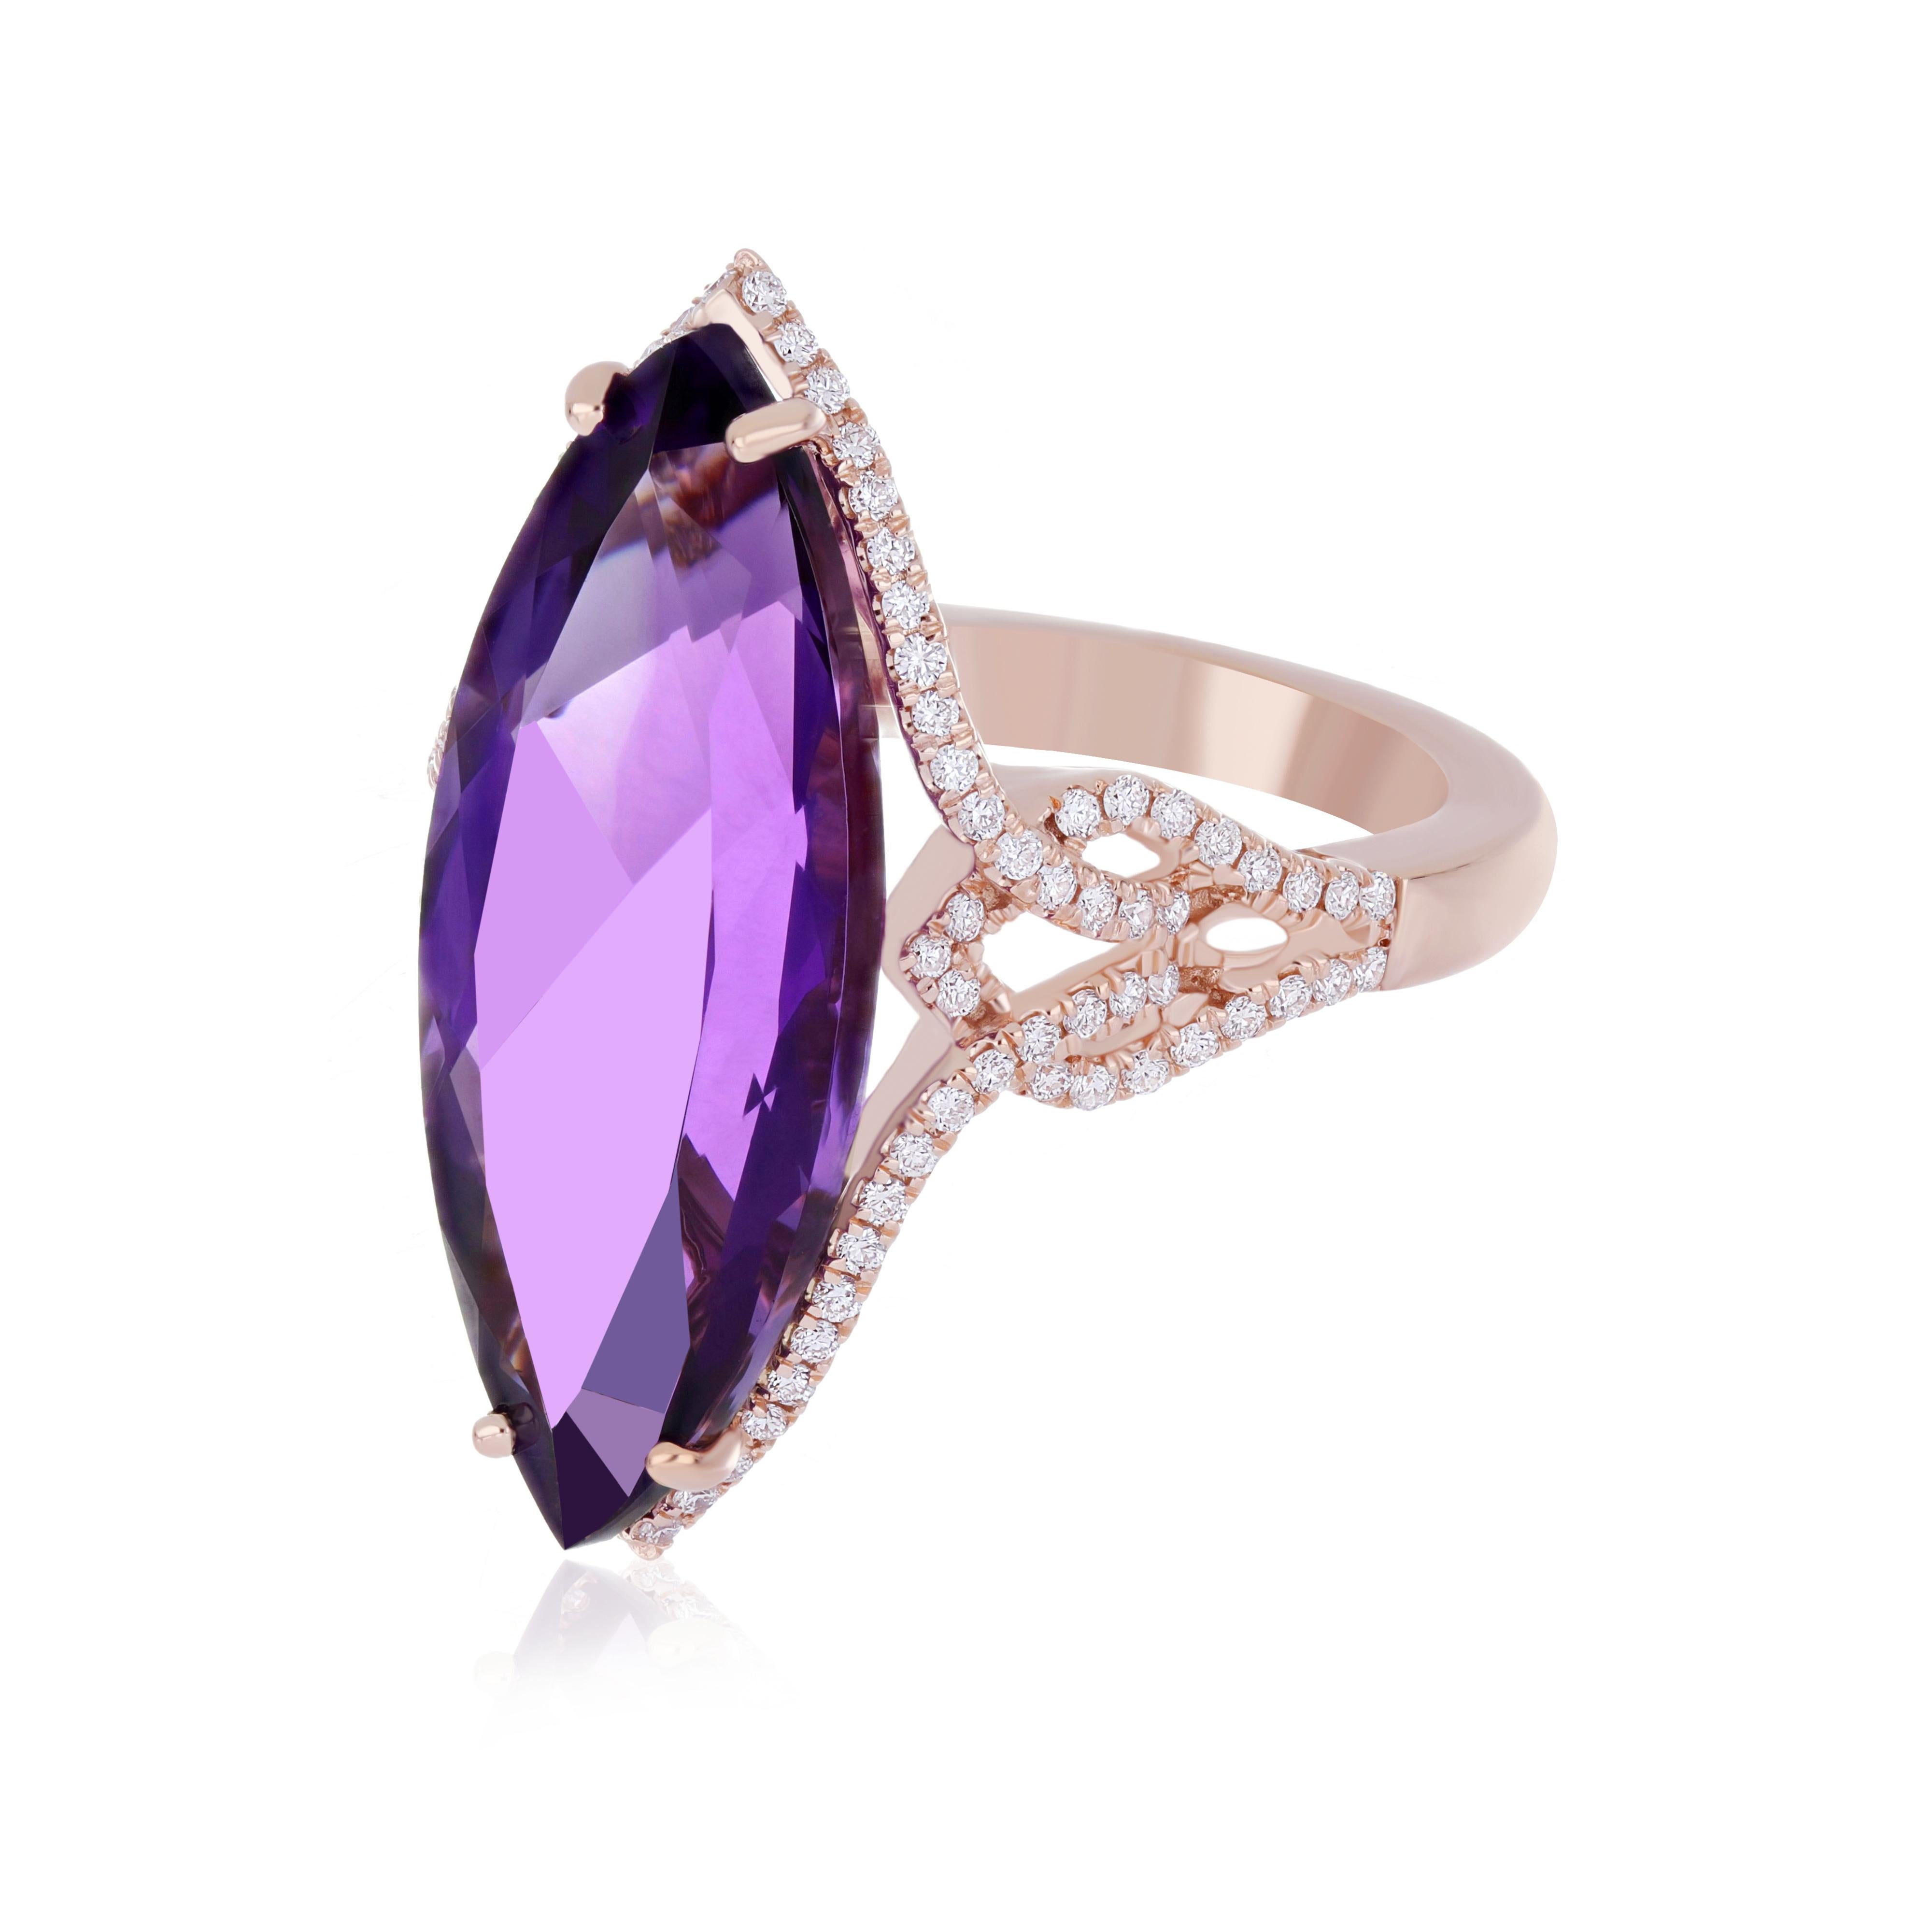 For Sale:  9.85cts Amethyst and Diamond Ring in 14karat Rose Gold Cocktail Ring for Wedding 3